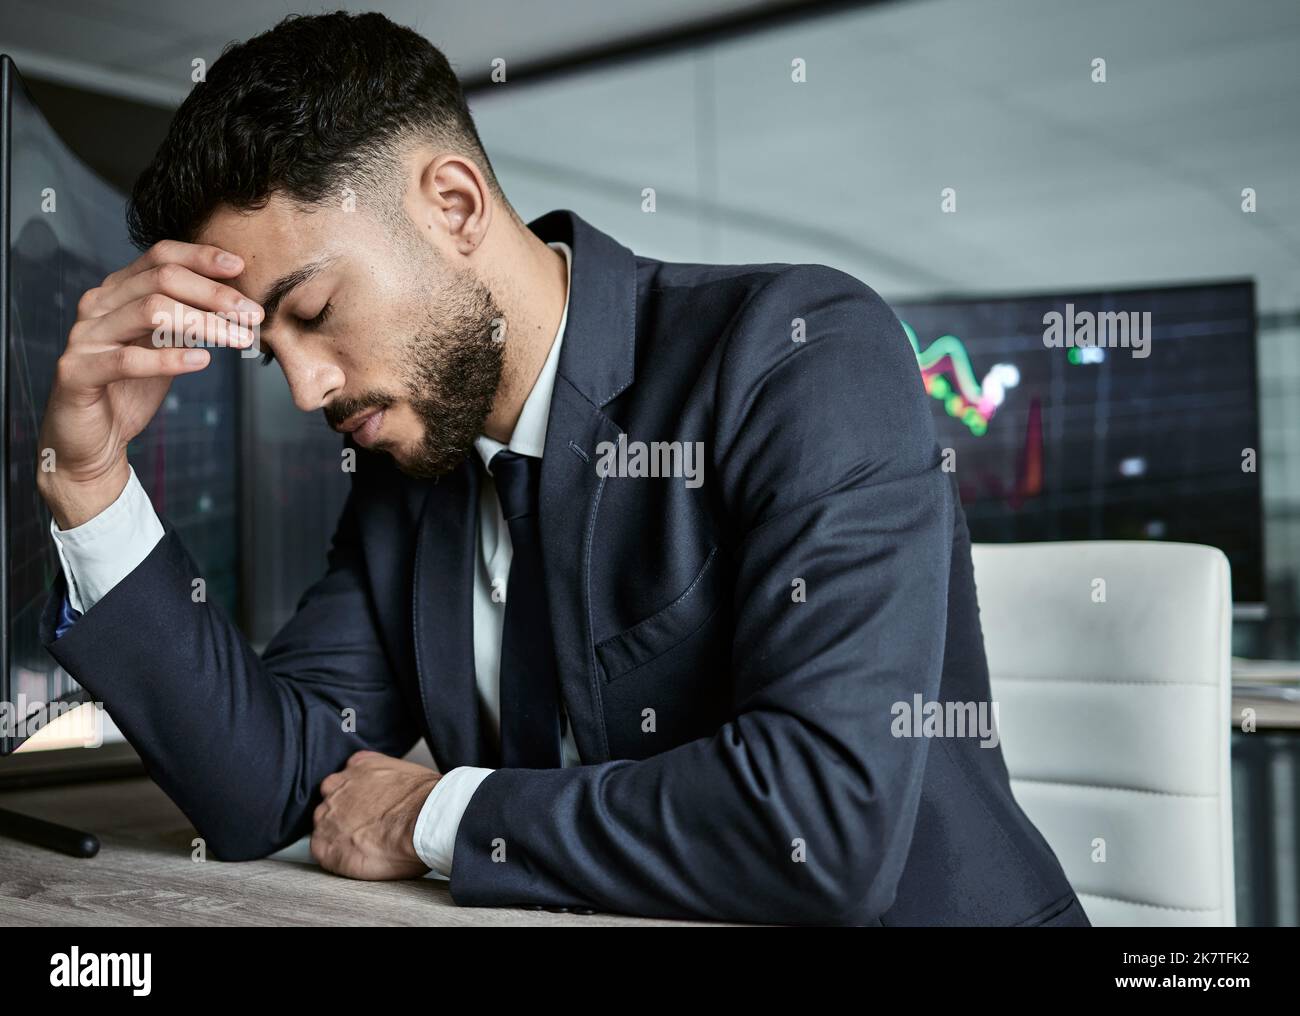 Businessman with depression on the stock market, trading during a financial crisis. Stressed trader in a bear market, looking at stocks crashing Stock Photo